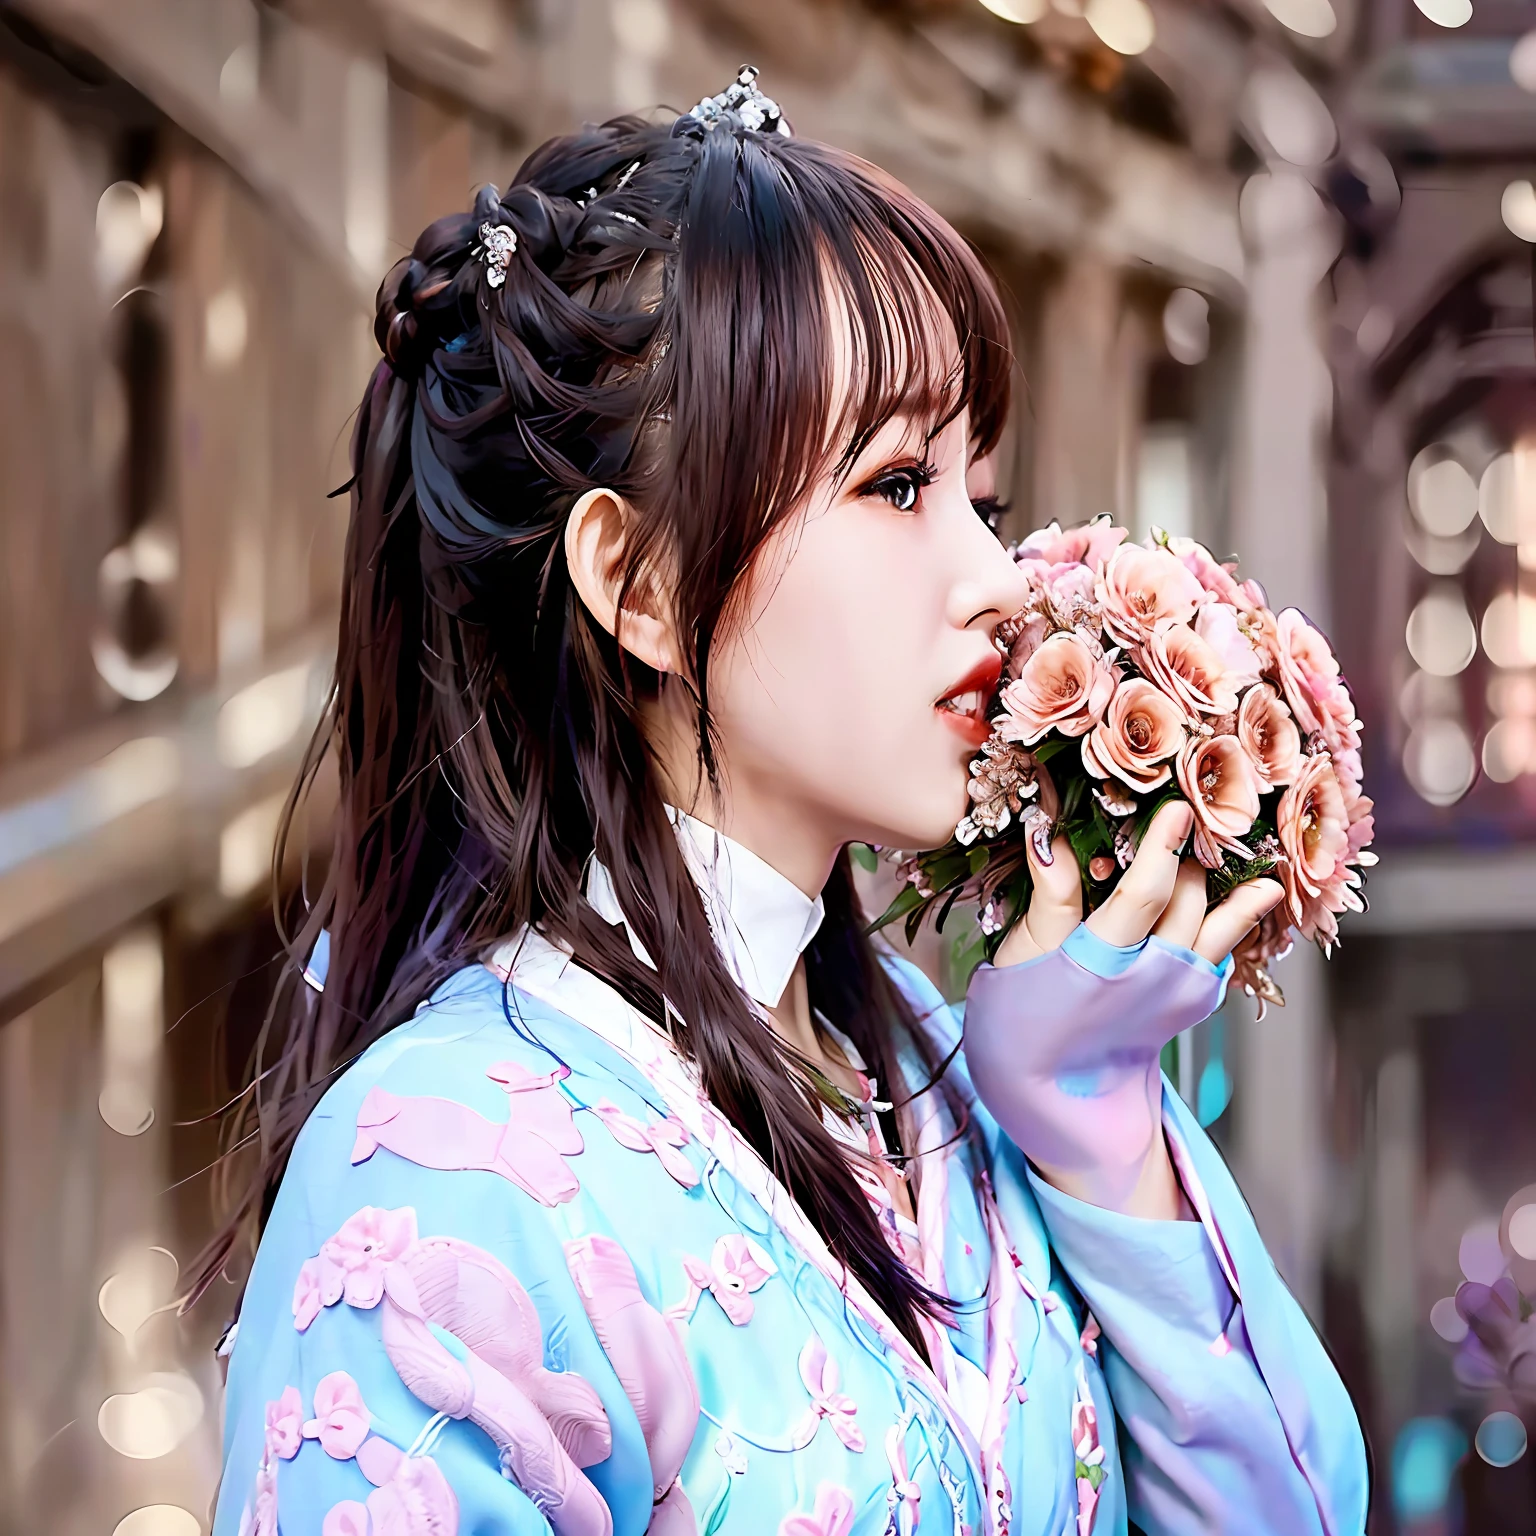 The Aalfed woman holds a bouquet of pink roses in front of the lattice, With flowers, blackpink jennie, shaxi, jia, Holding flowers, full bloom, carrying flowers, flowers on the cheeks of the heir, krystal, inspirado por Kim Jeong-hui, her face looks like an orchid, with frozen flowers around her, flower, Holding a flower, laughing sweetly